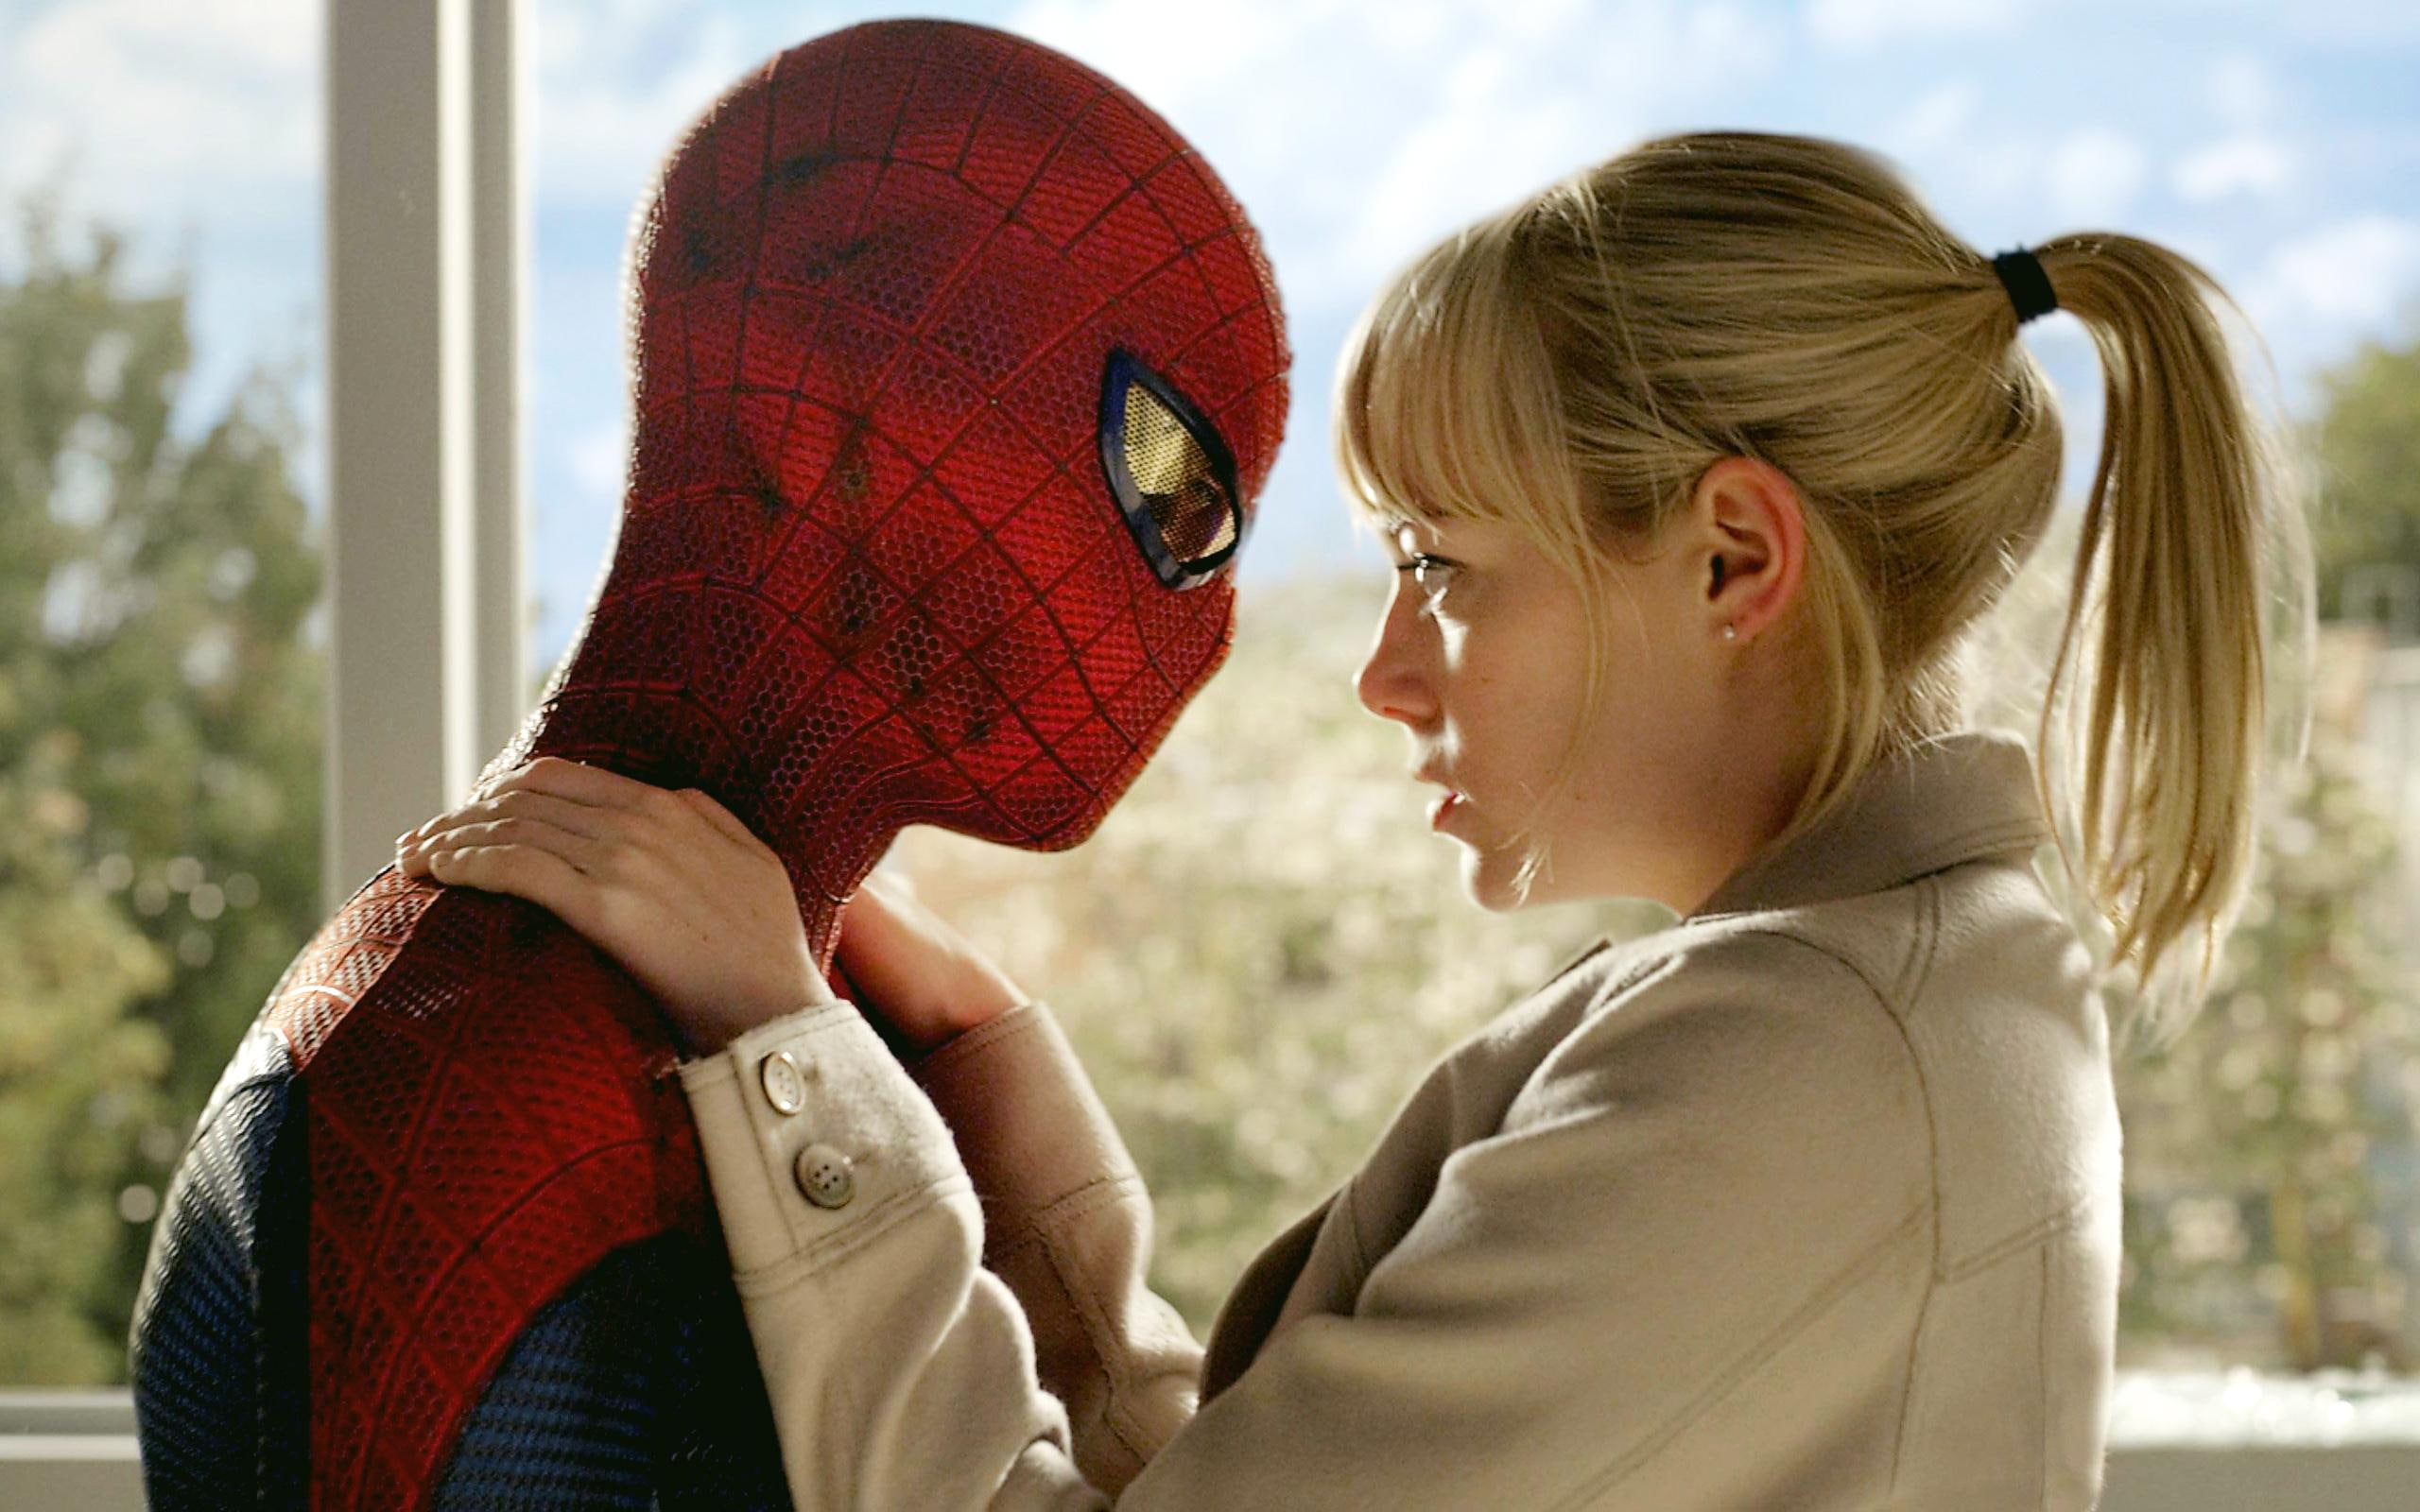 Spider Man and Gwen Stacy, movies